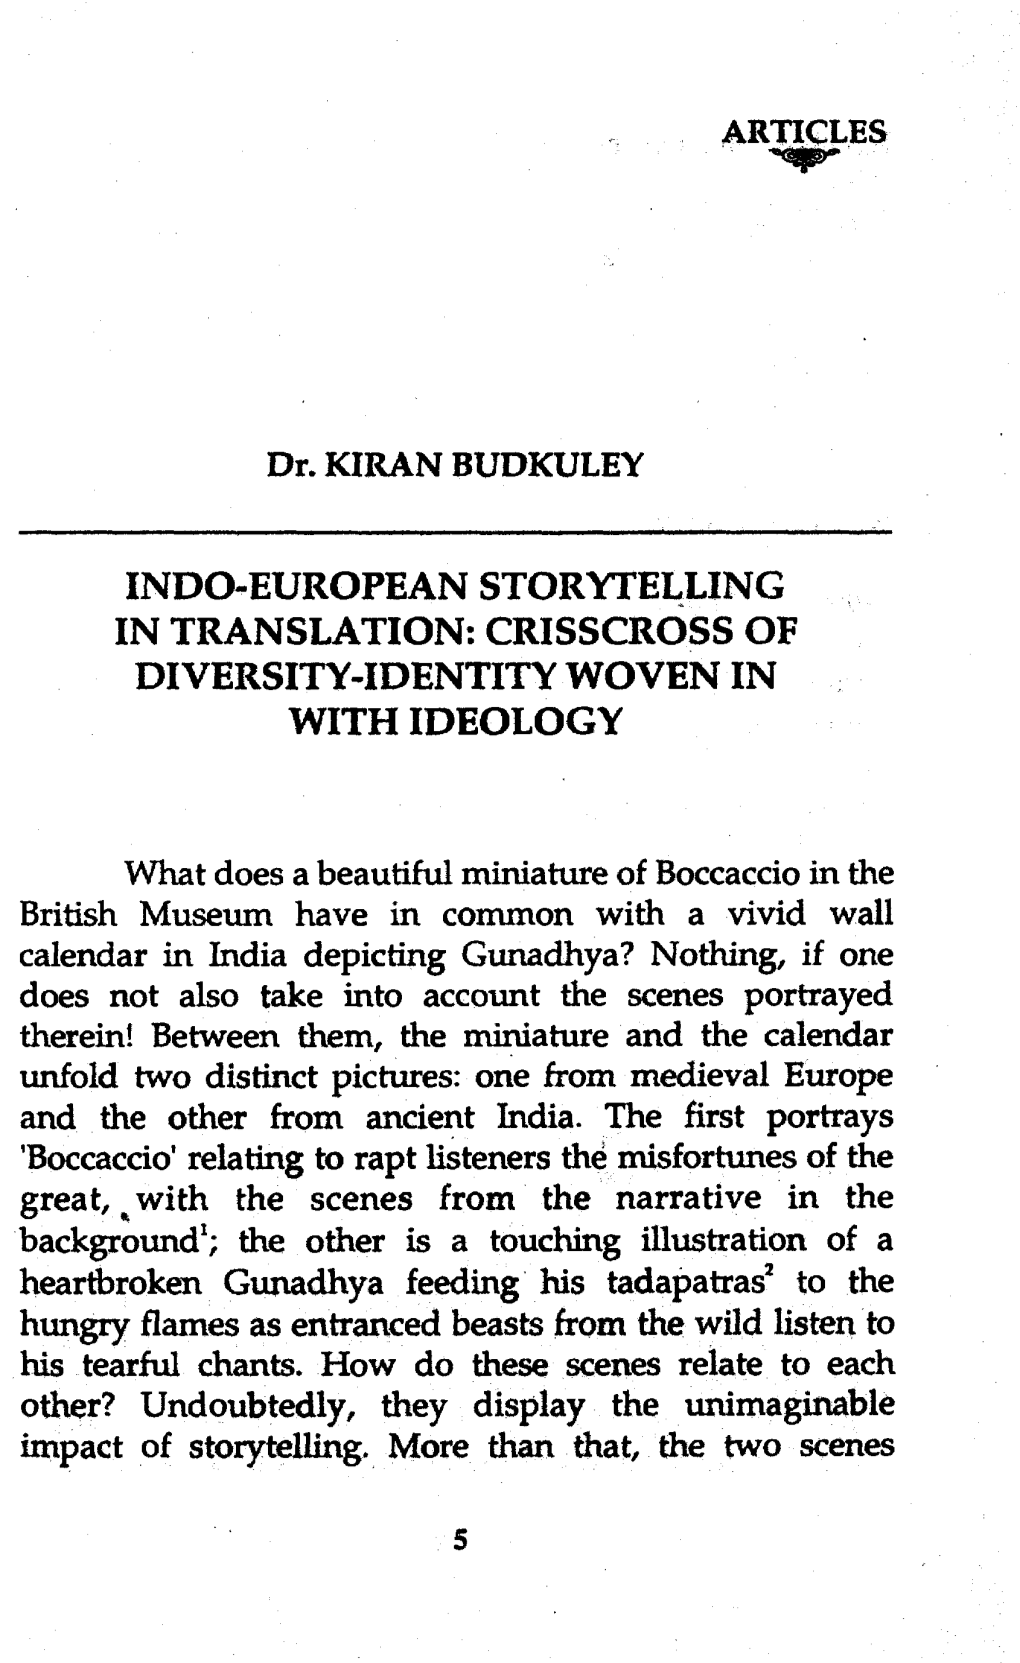 Indo-European Storytelling in Translation: Crisscross of Diversity-Identity Woven in with Ideology